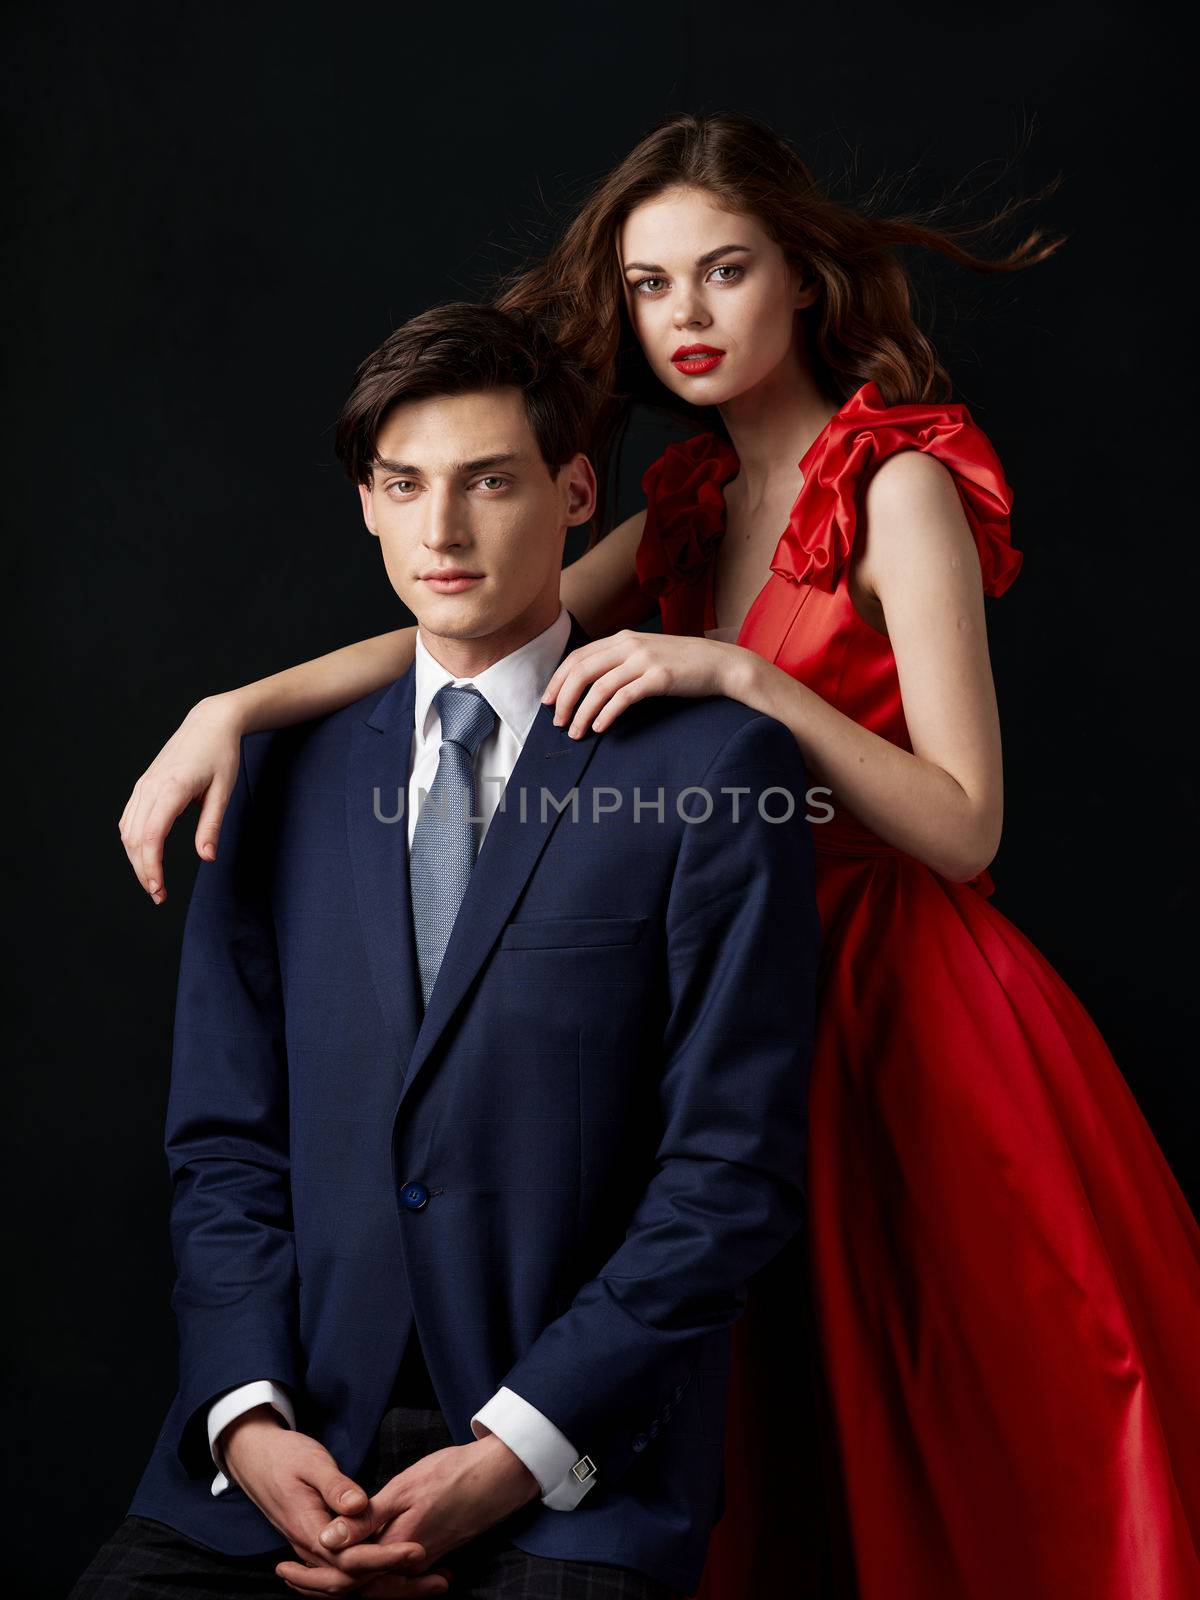 Pin-up couple portrait woman in red dress man in suit by SHOTPRIME